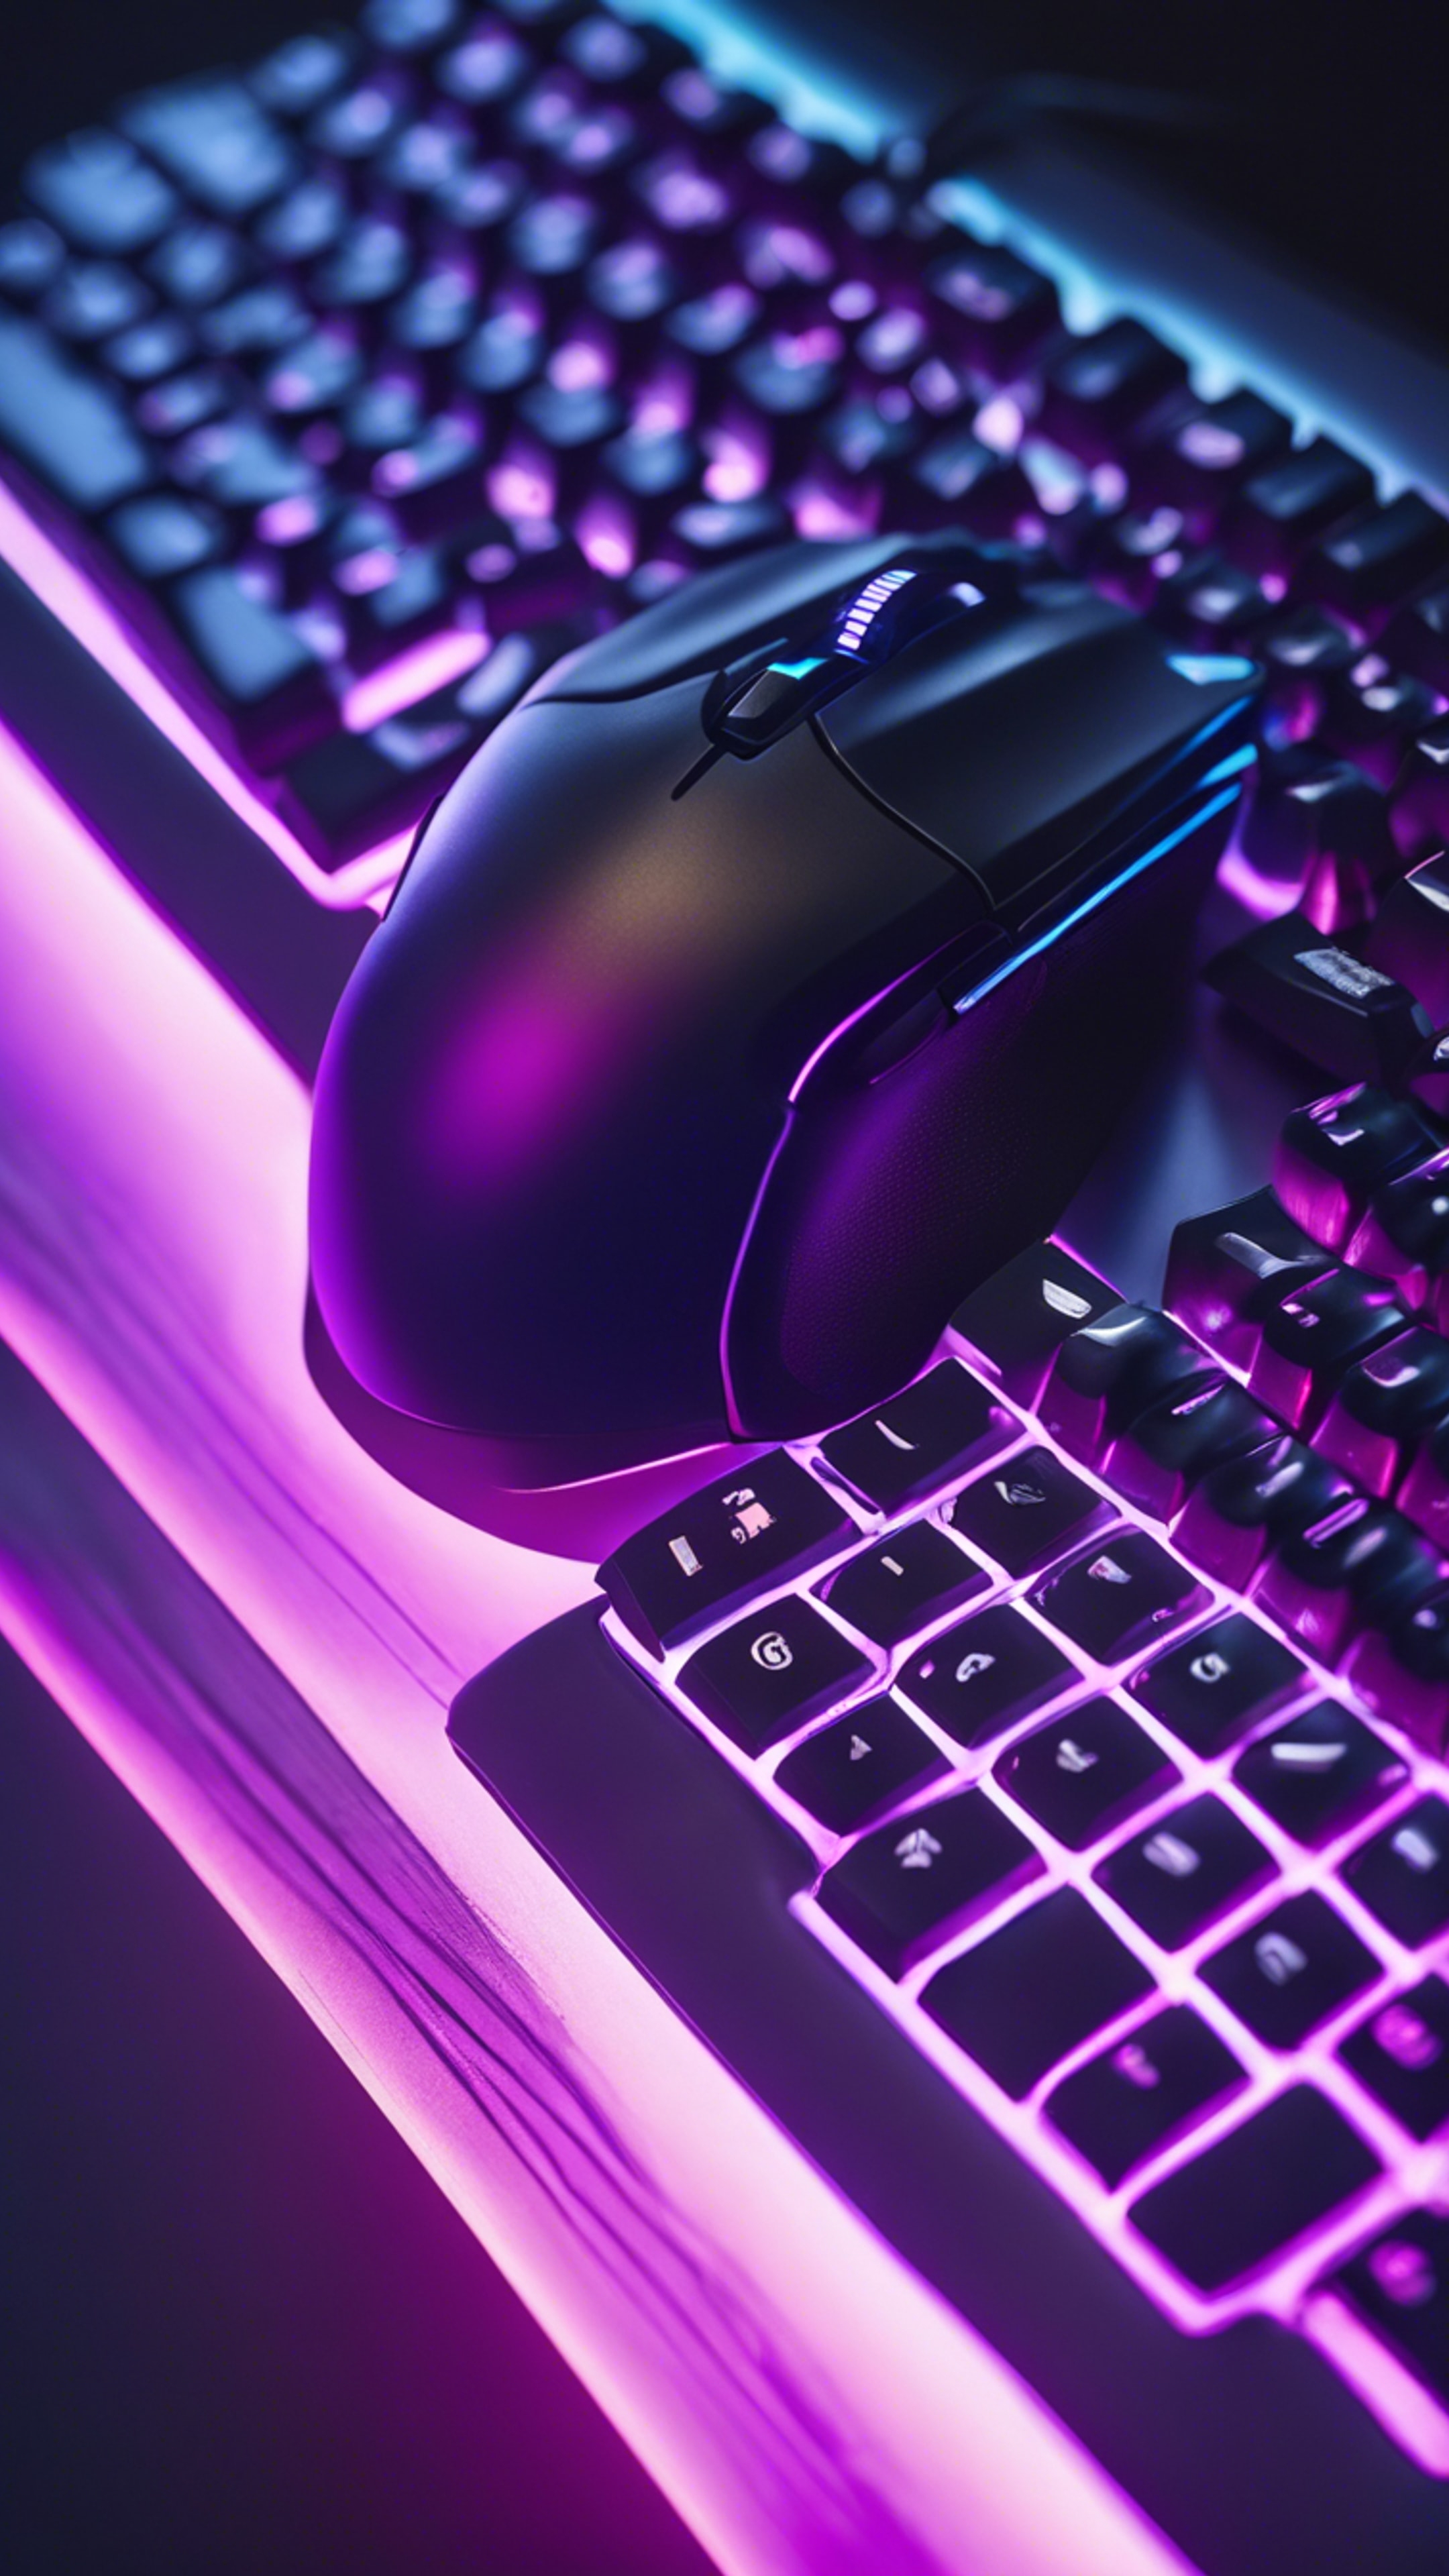 A top down view of a gaming keyboard and mouse bathed in a soothing gradient of blue to purple backlighting. کاغذ دیواری[d1c9d3144afe4da3b536]